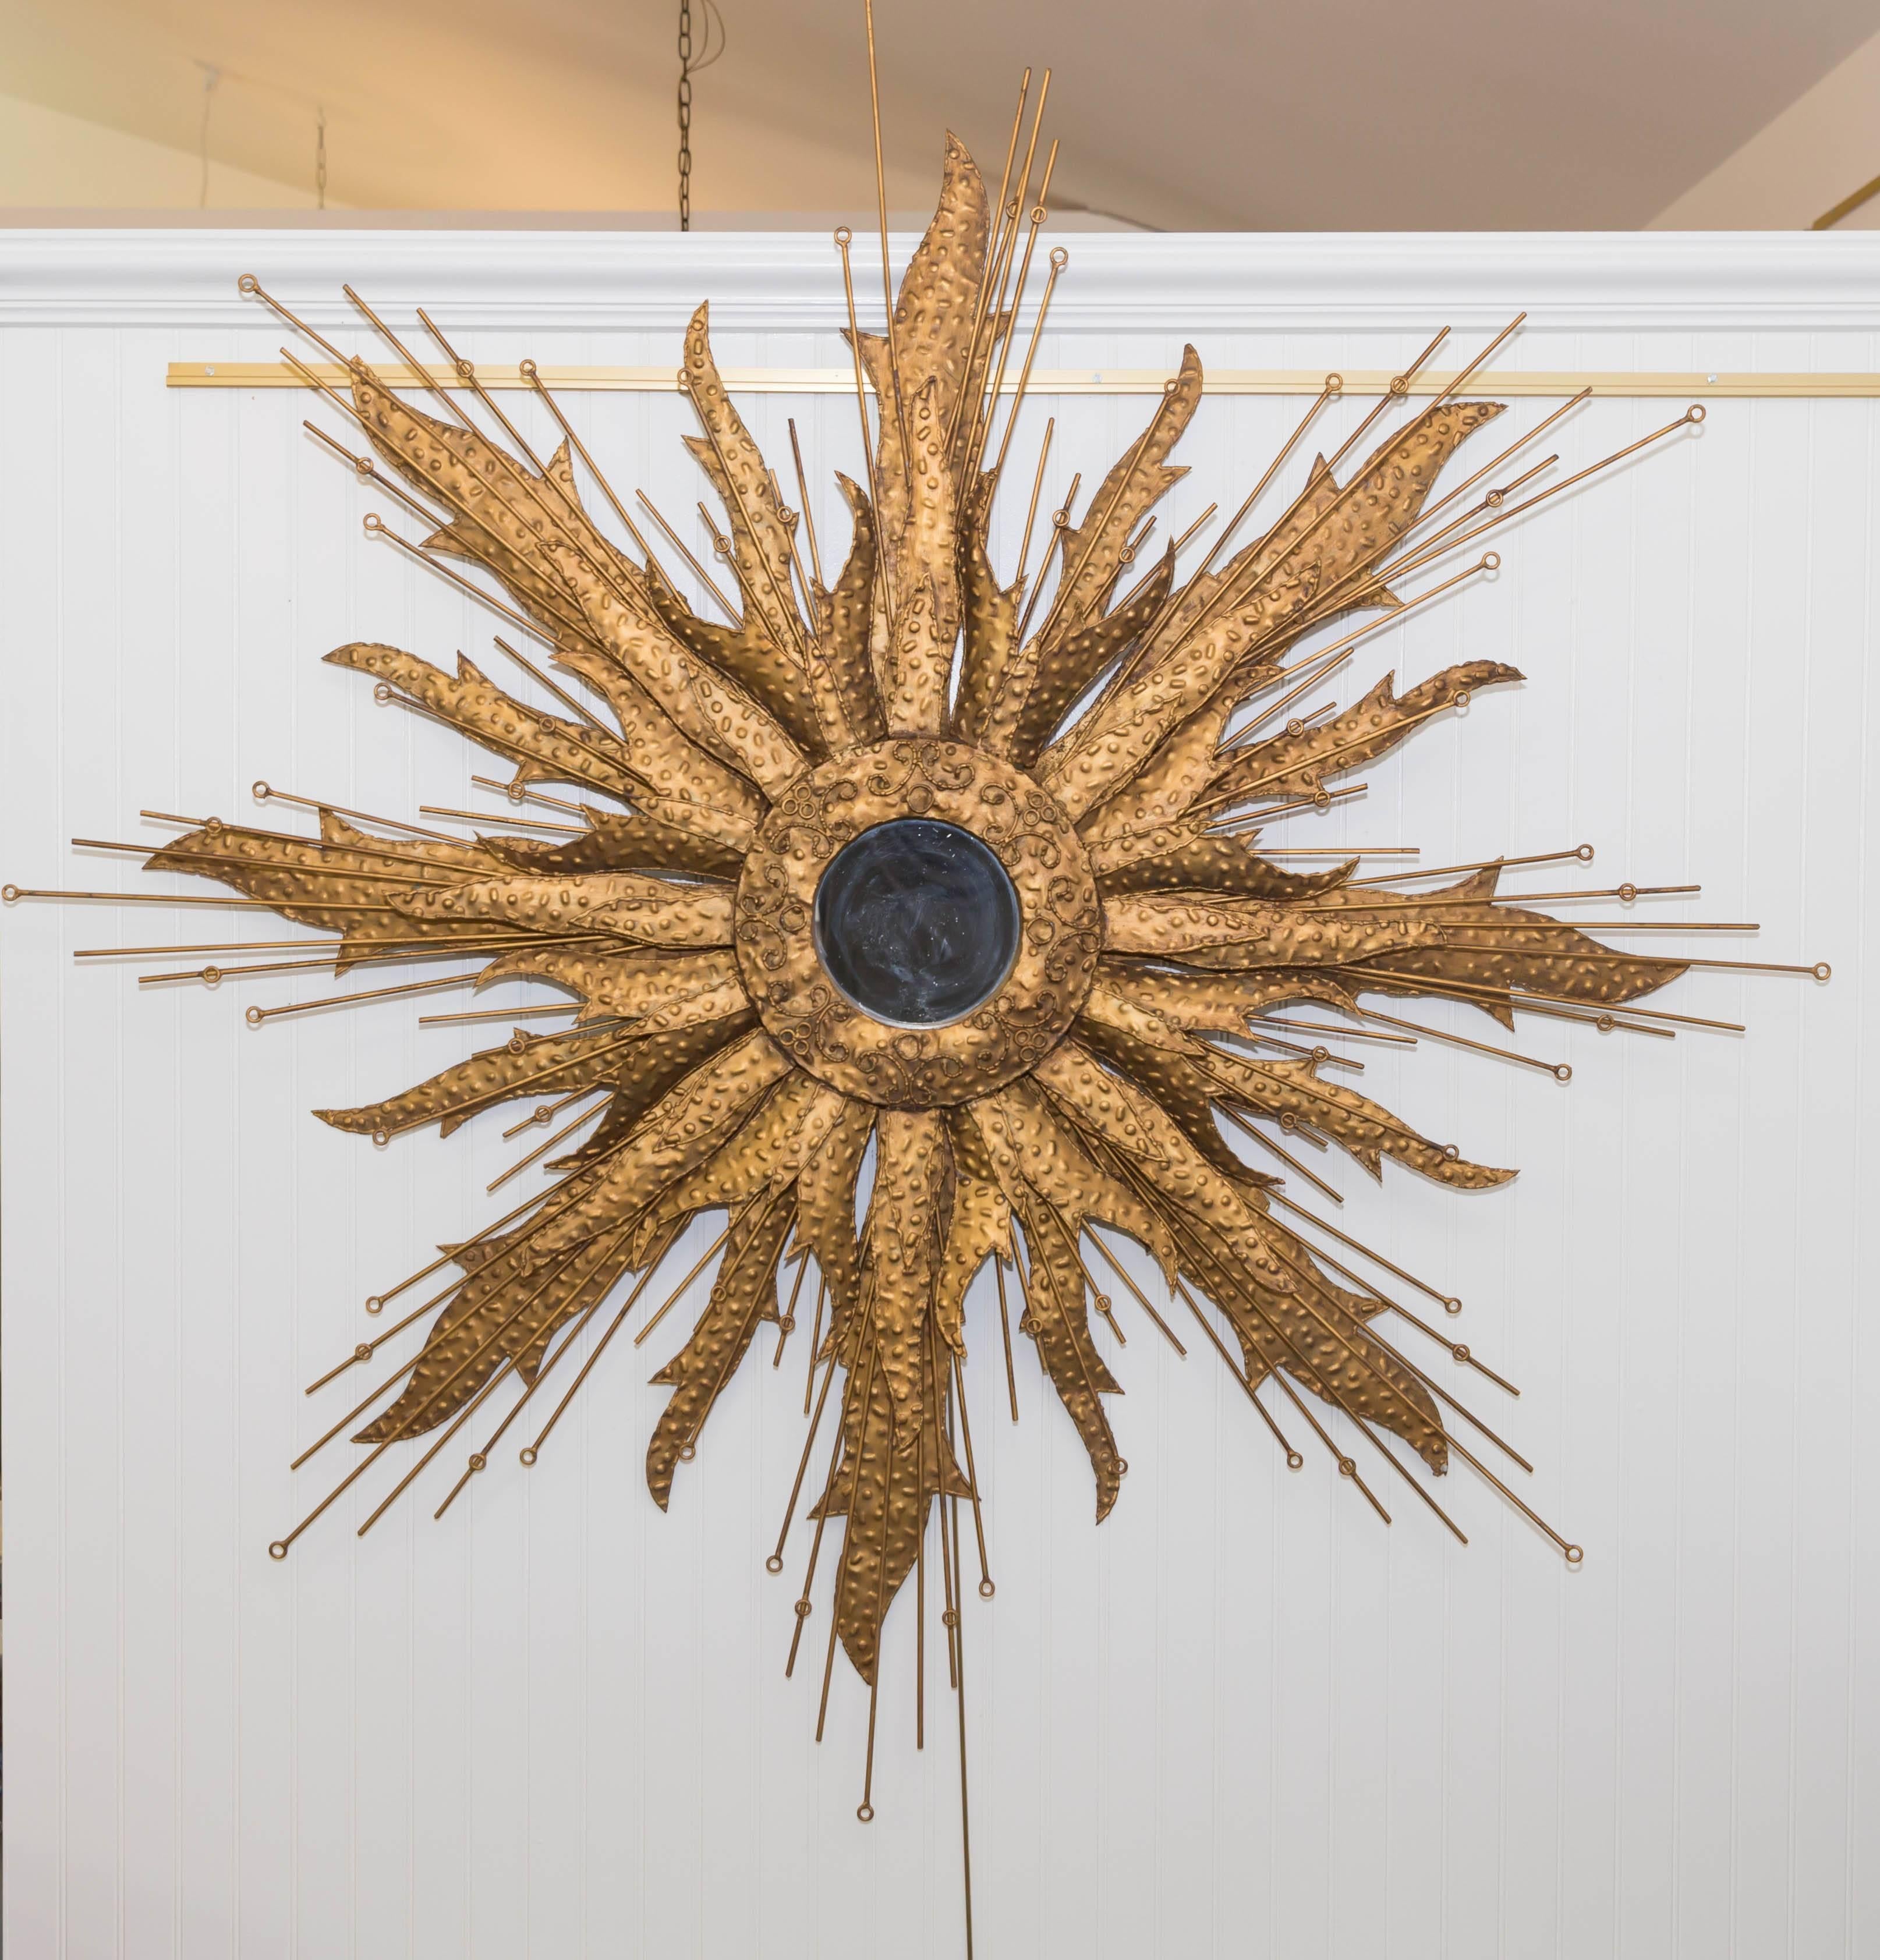 Metal sunburst shape mirror in the Brutalist style, radiating strips of metal forming sunrays with texture and iron rods interspersed throughout.